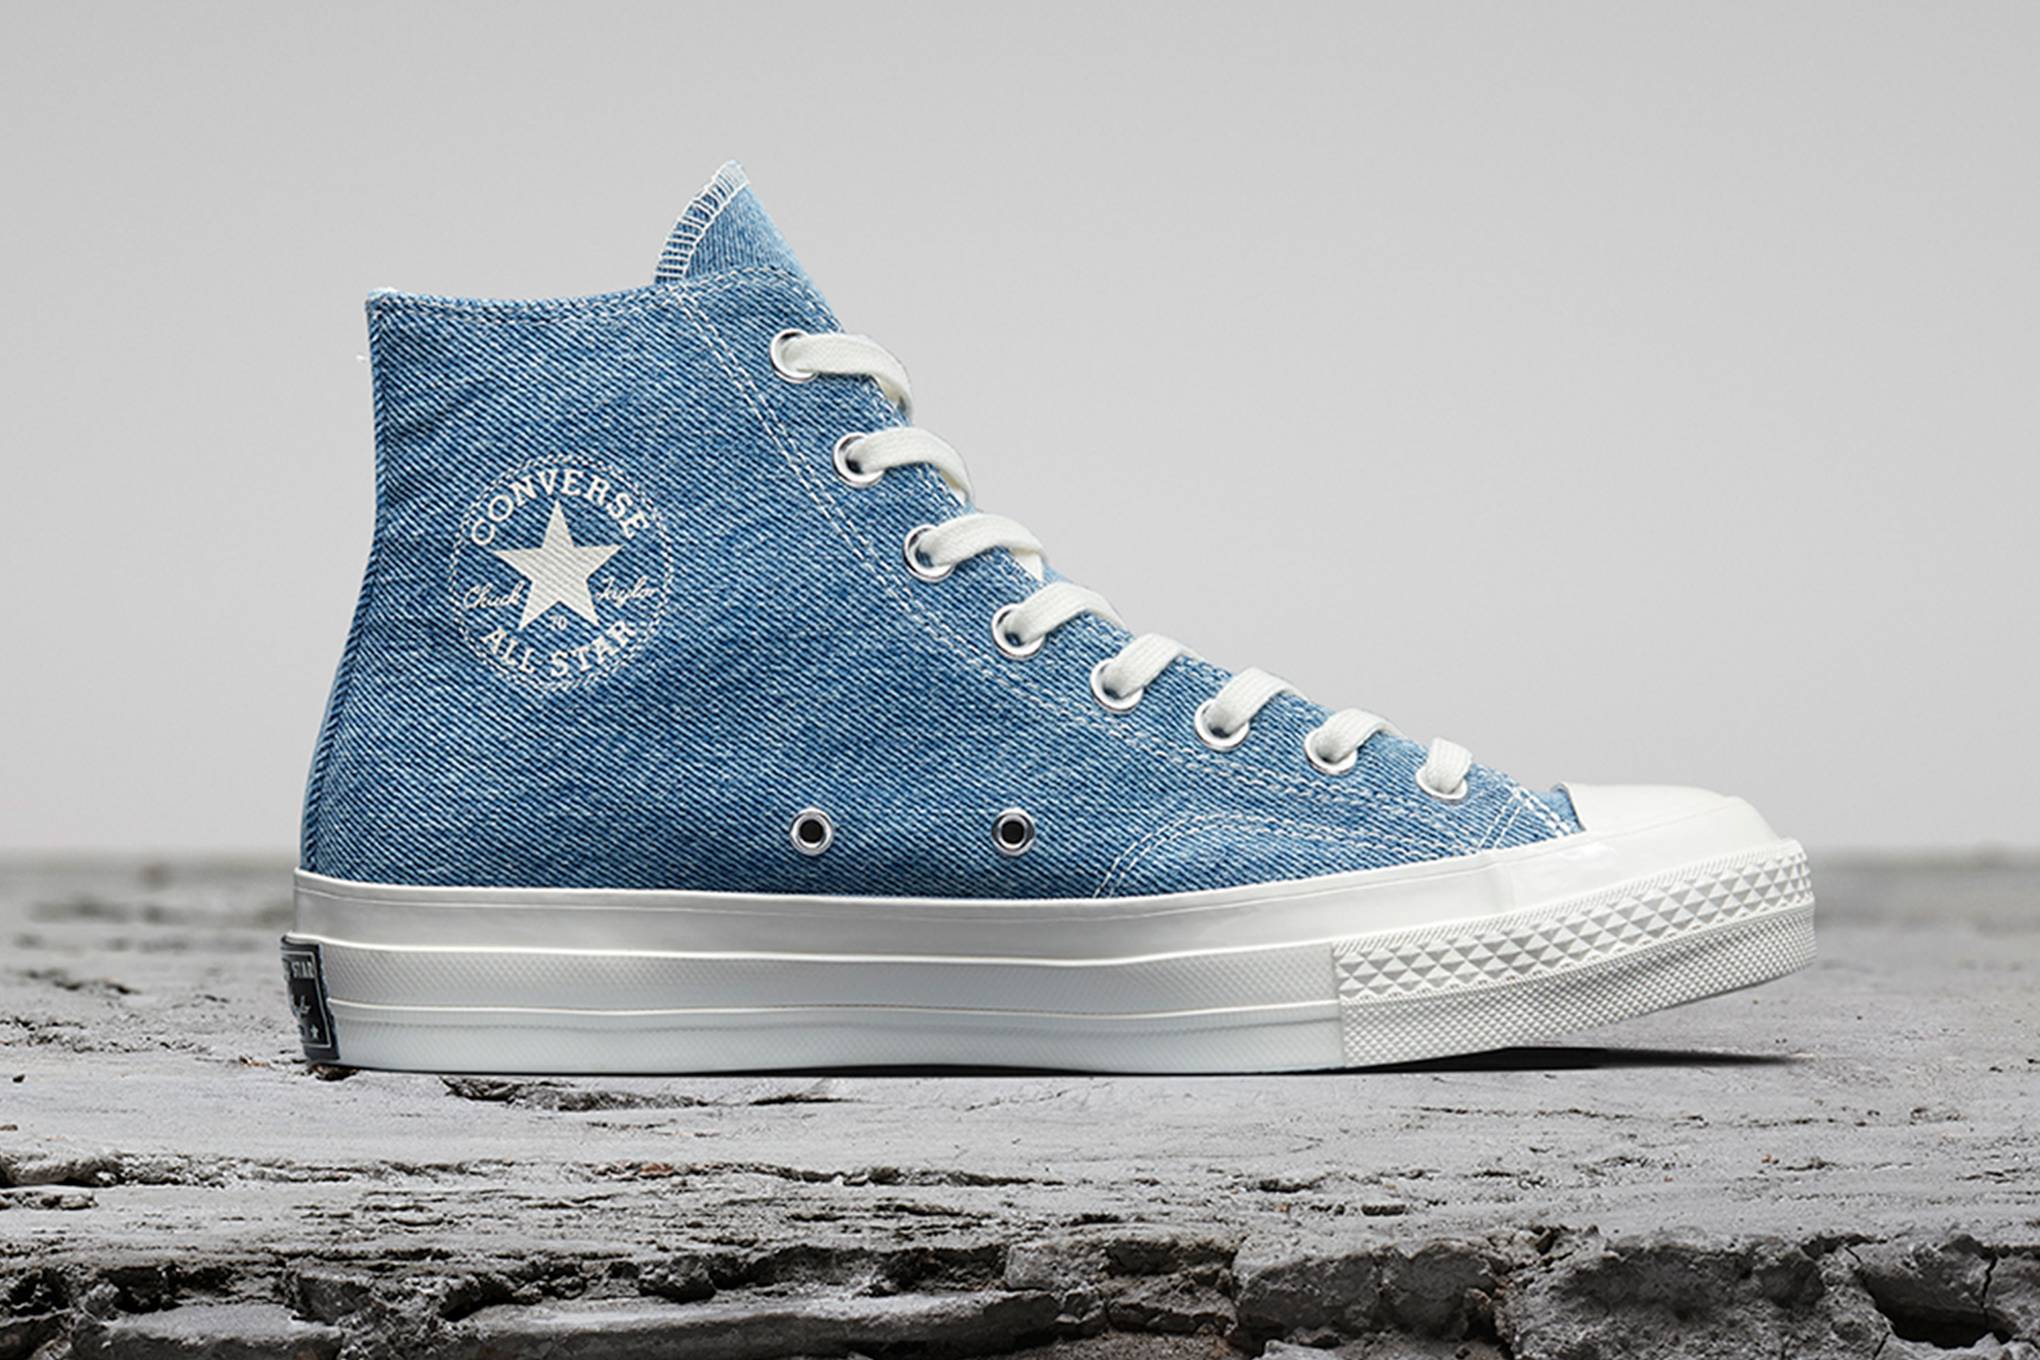 New Converse Renew trainers are made 